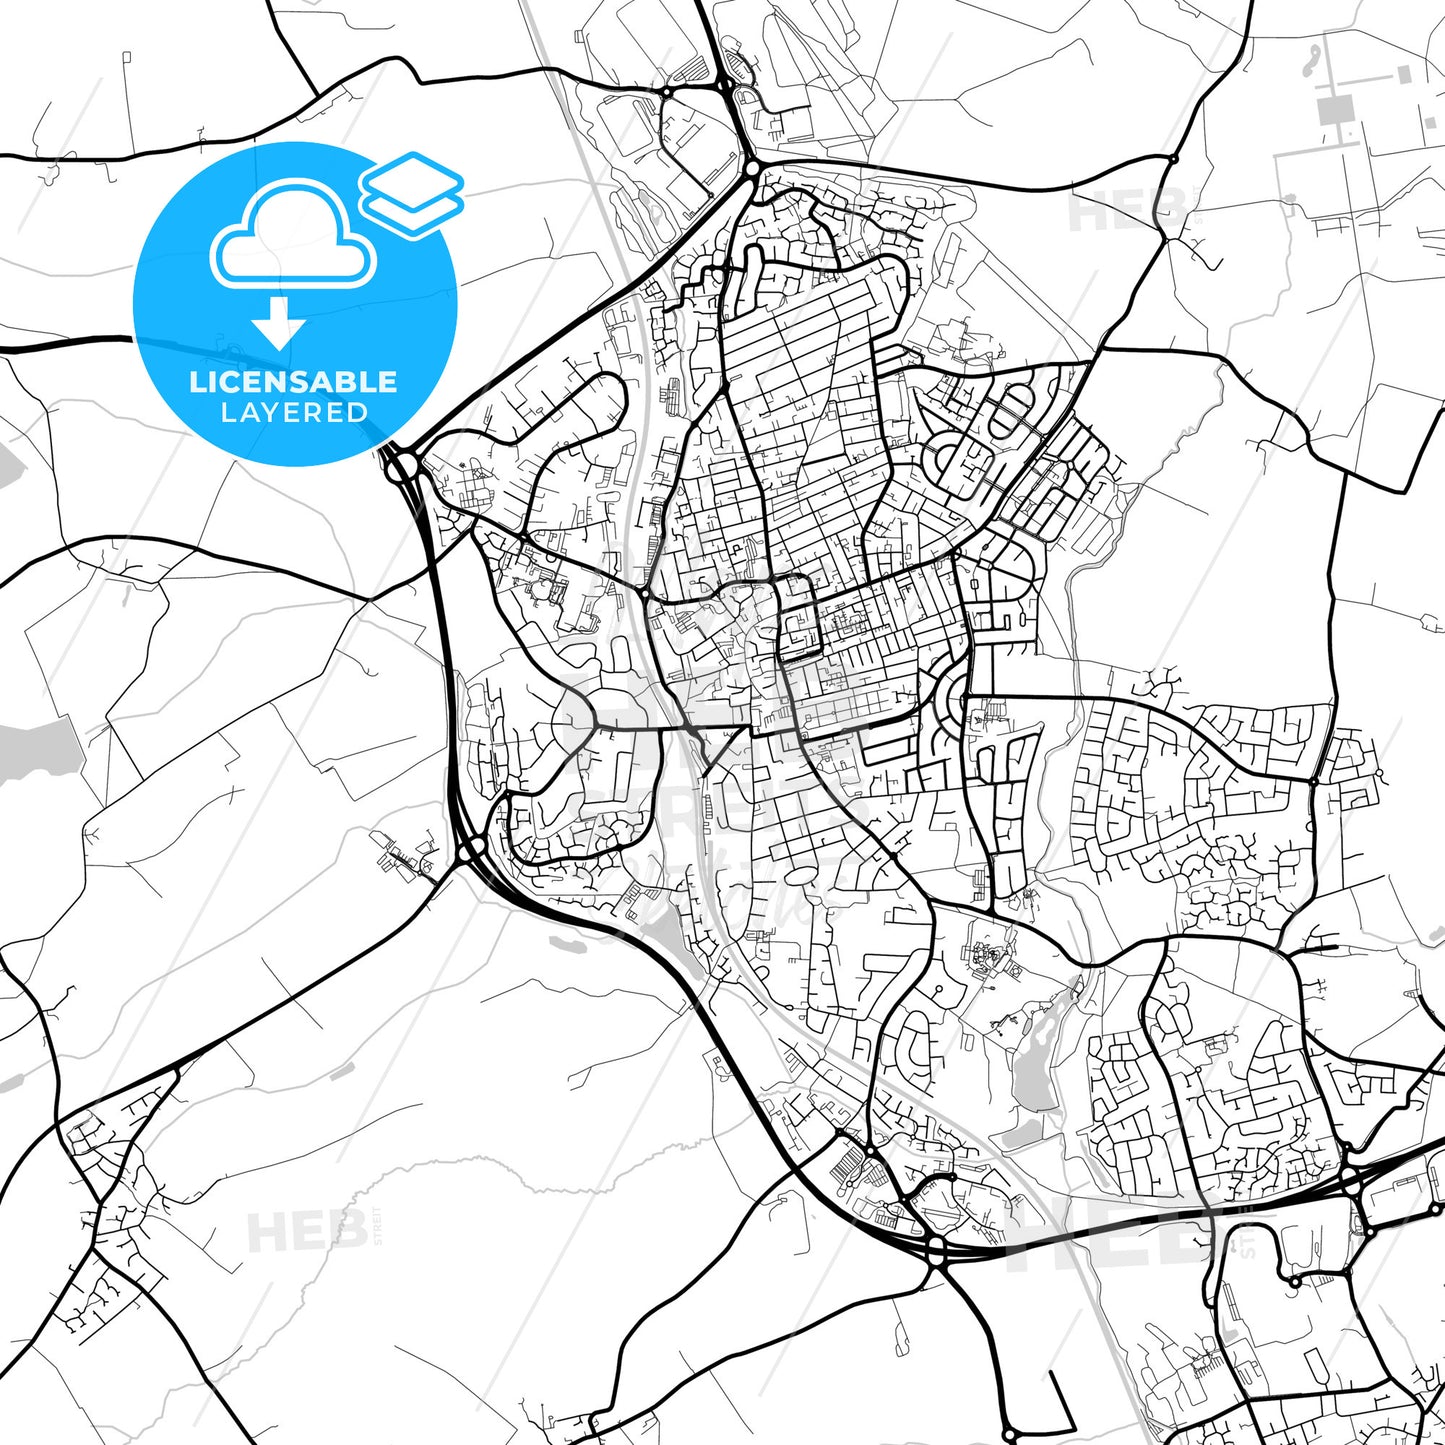 Layered PDF map of Kettering, East Midlands, England